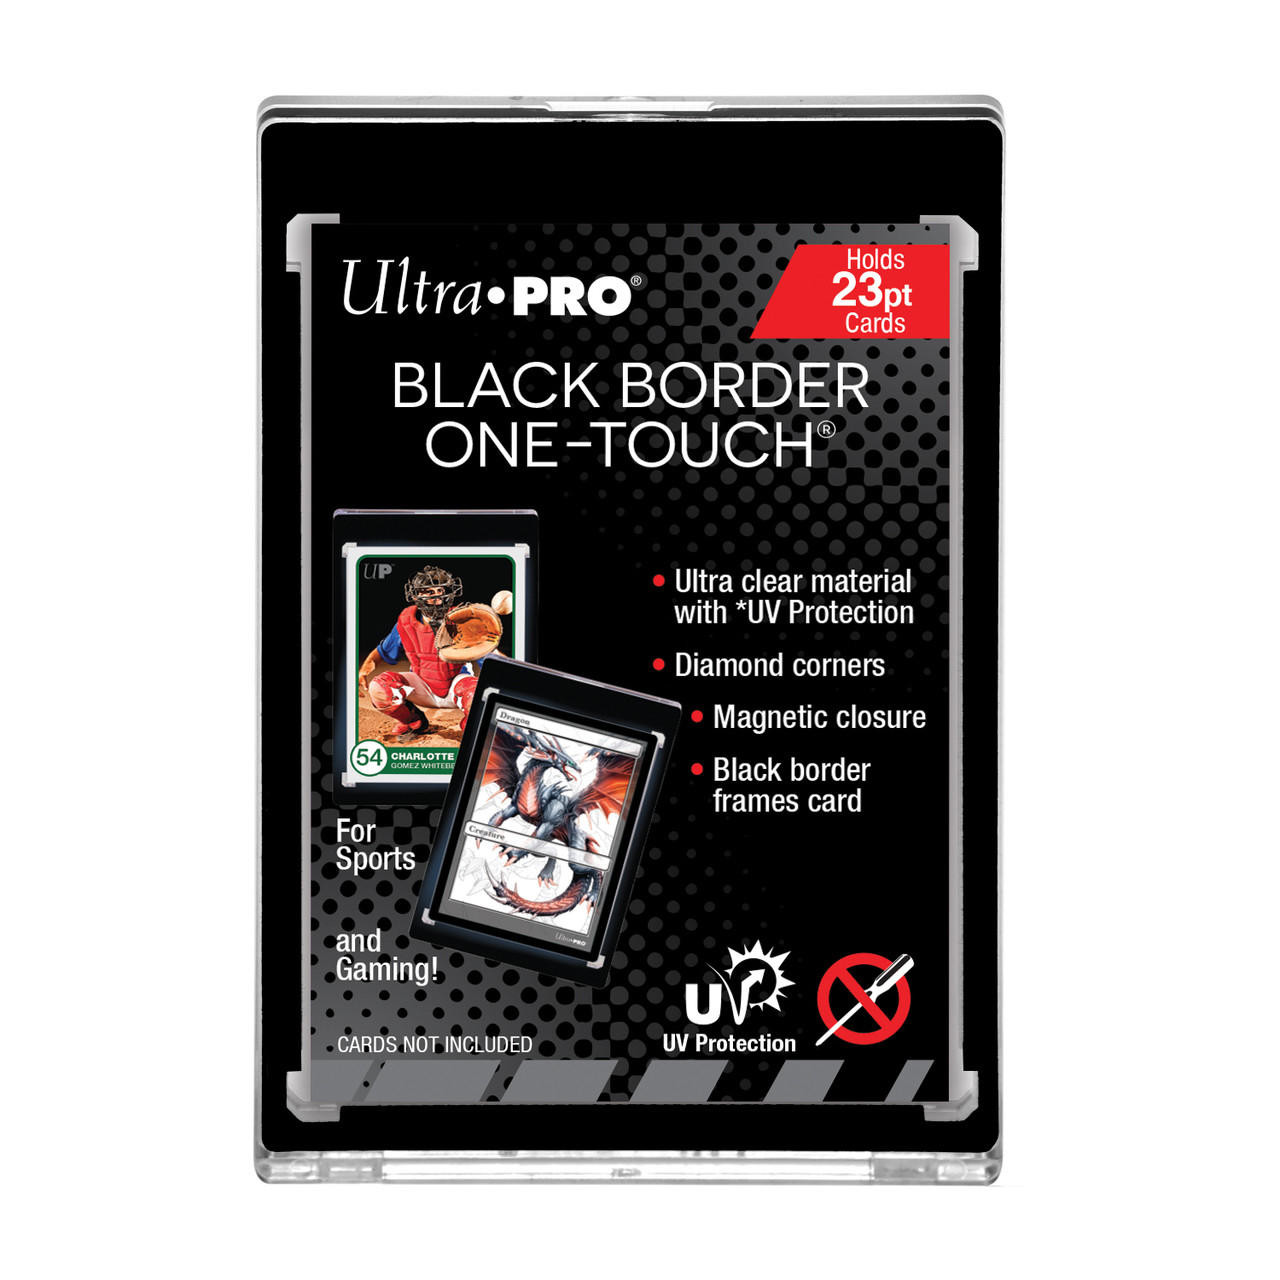 https://cdn11.bigcommerce.com/s-12zh048z64/images/stencil/1280x1280/products/1366/7014/ultra-pro-23pt-thin-size-black-border-one-touch-magnetic-trading-card-holder-with-uv__56636.1662122711.jpg?c=2&imbypass=on